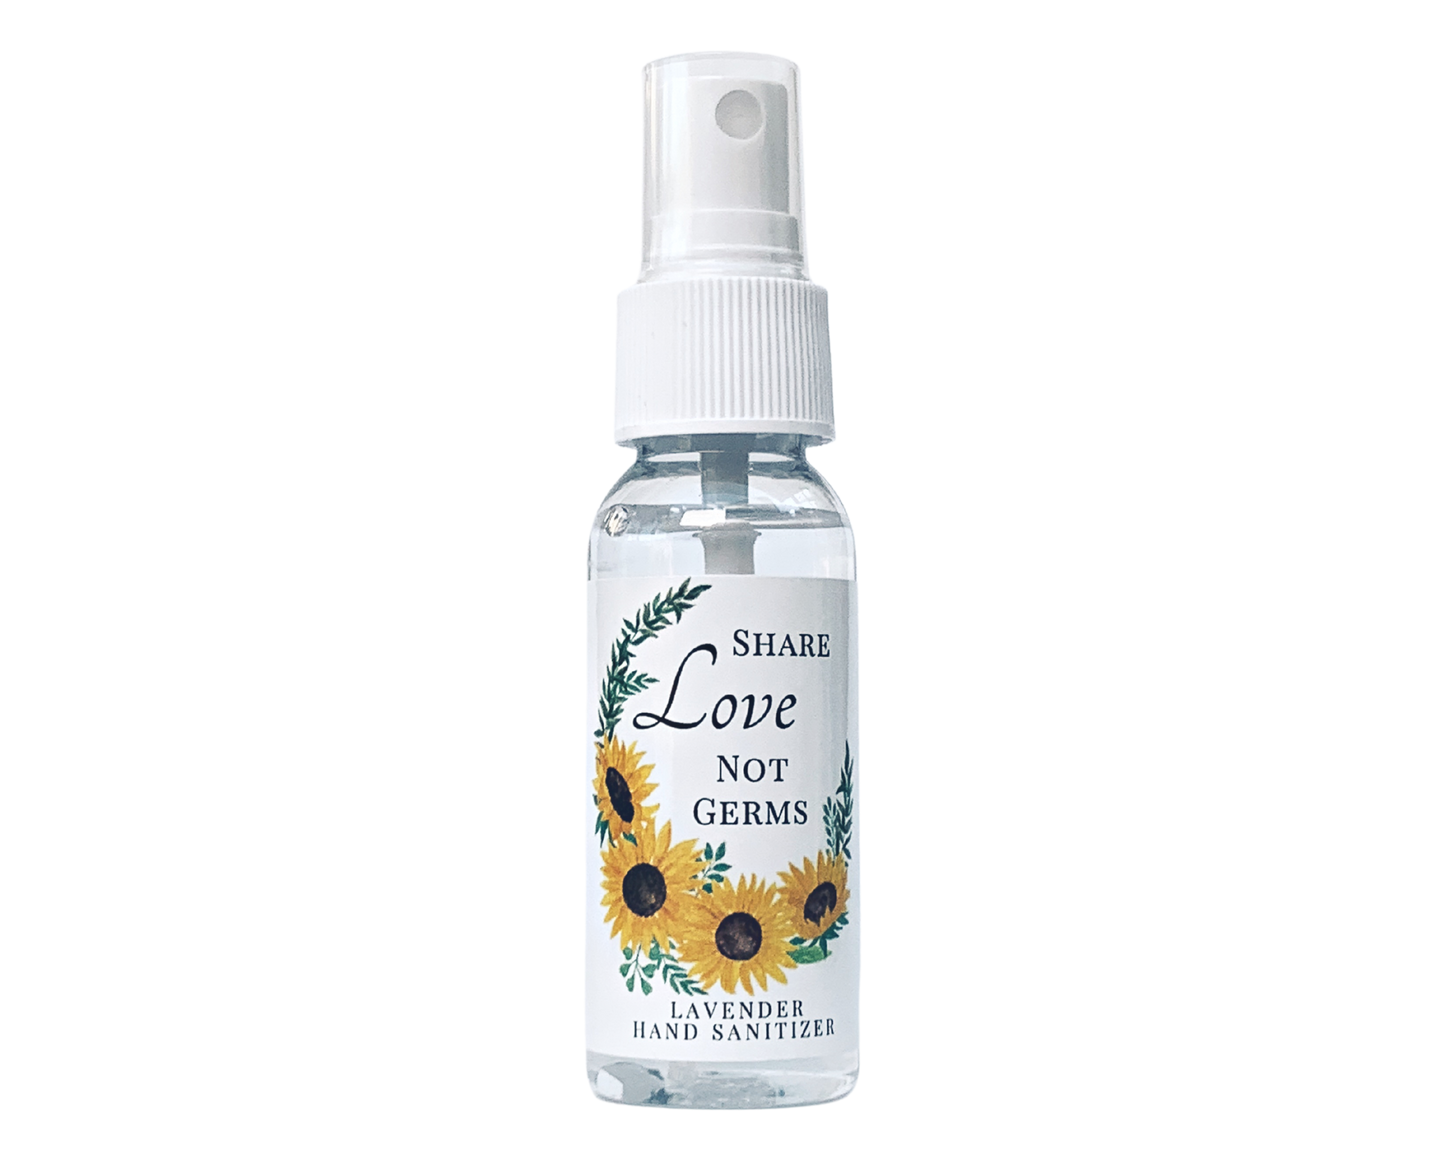 Hand Sanitizer Party Favor - Sunflower Wreath - Share Love Not Germs - with Aloe & Essential Oils by Sunshine & Sanitizer